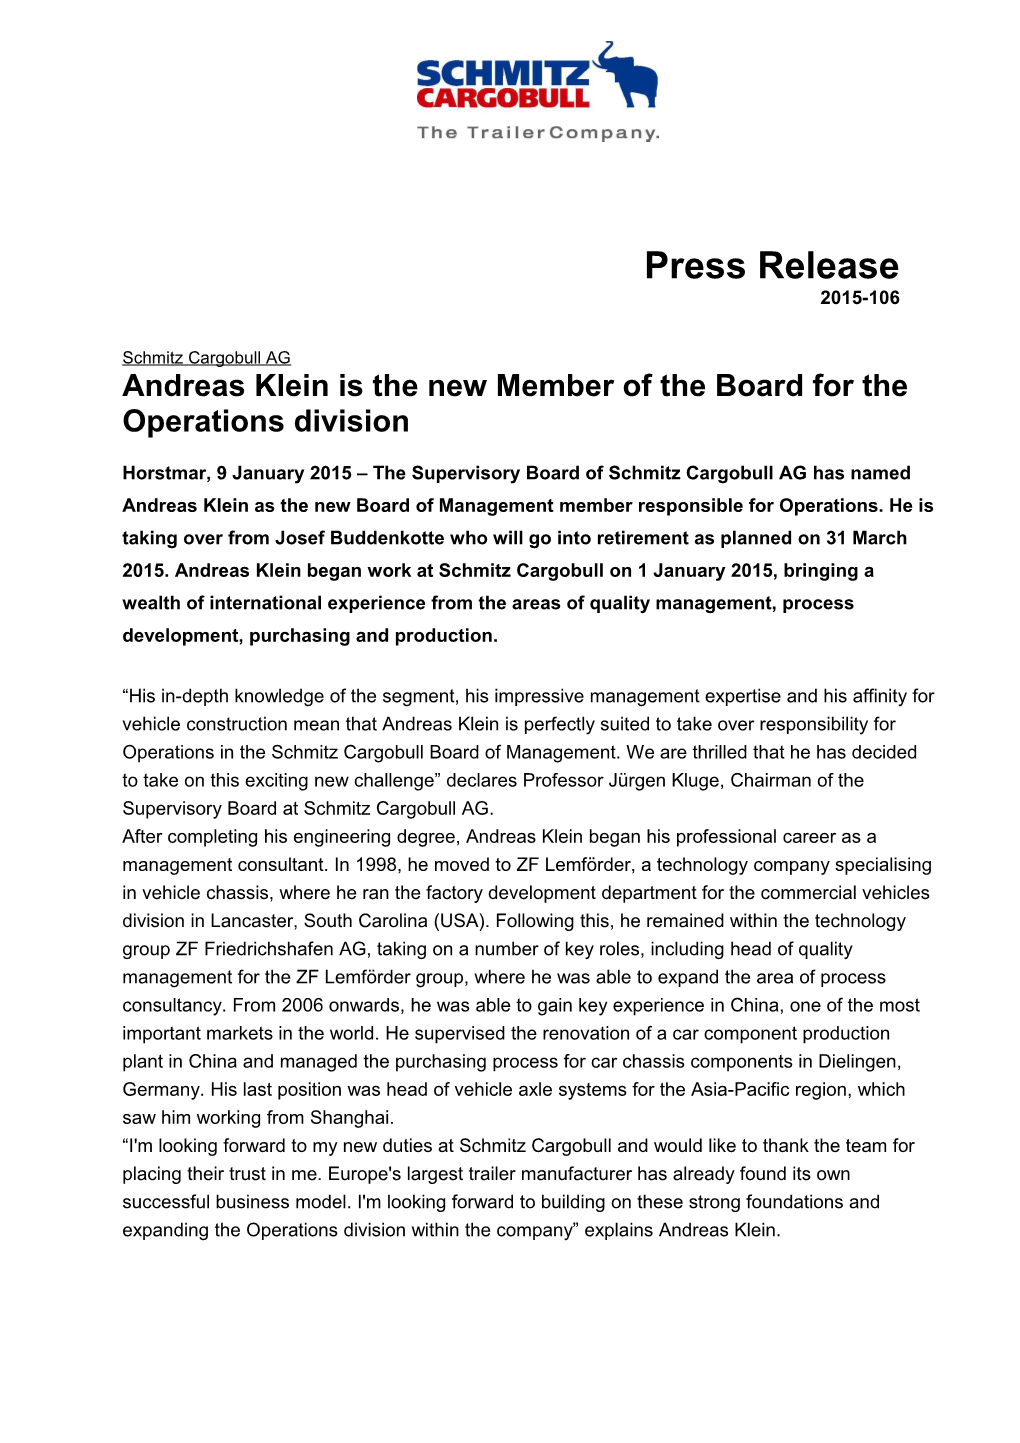 Andreas Klein Is the New Member of the Board for the Operations Division